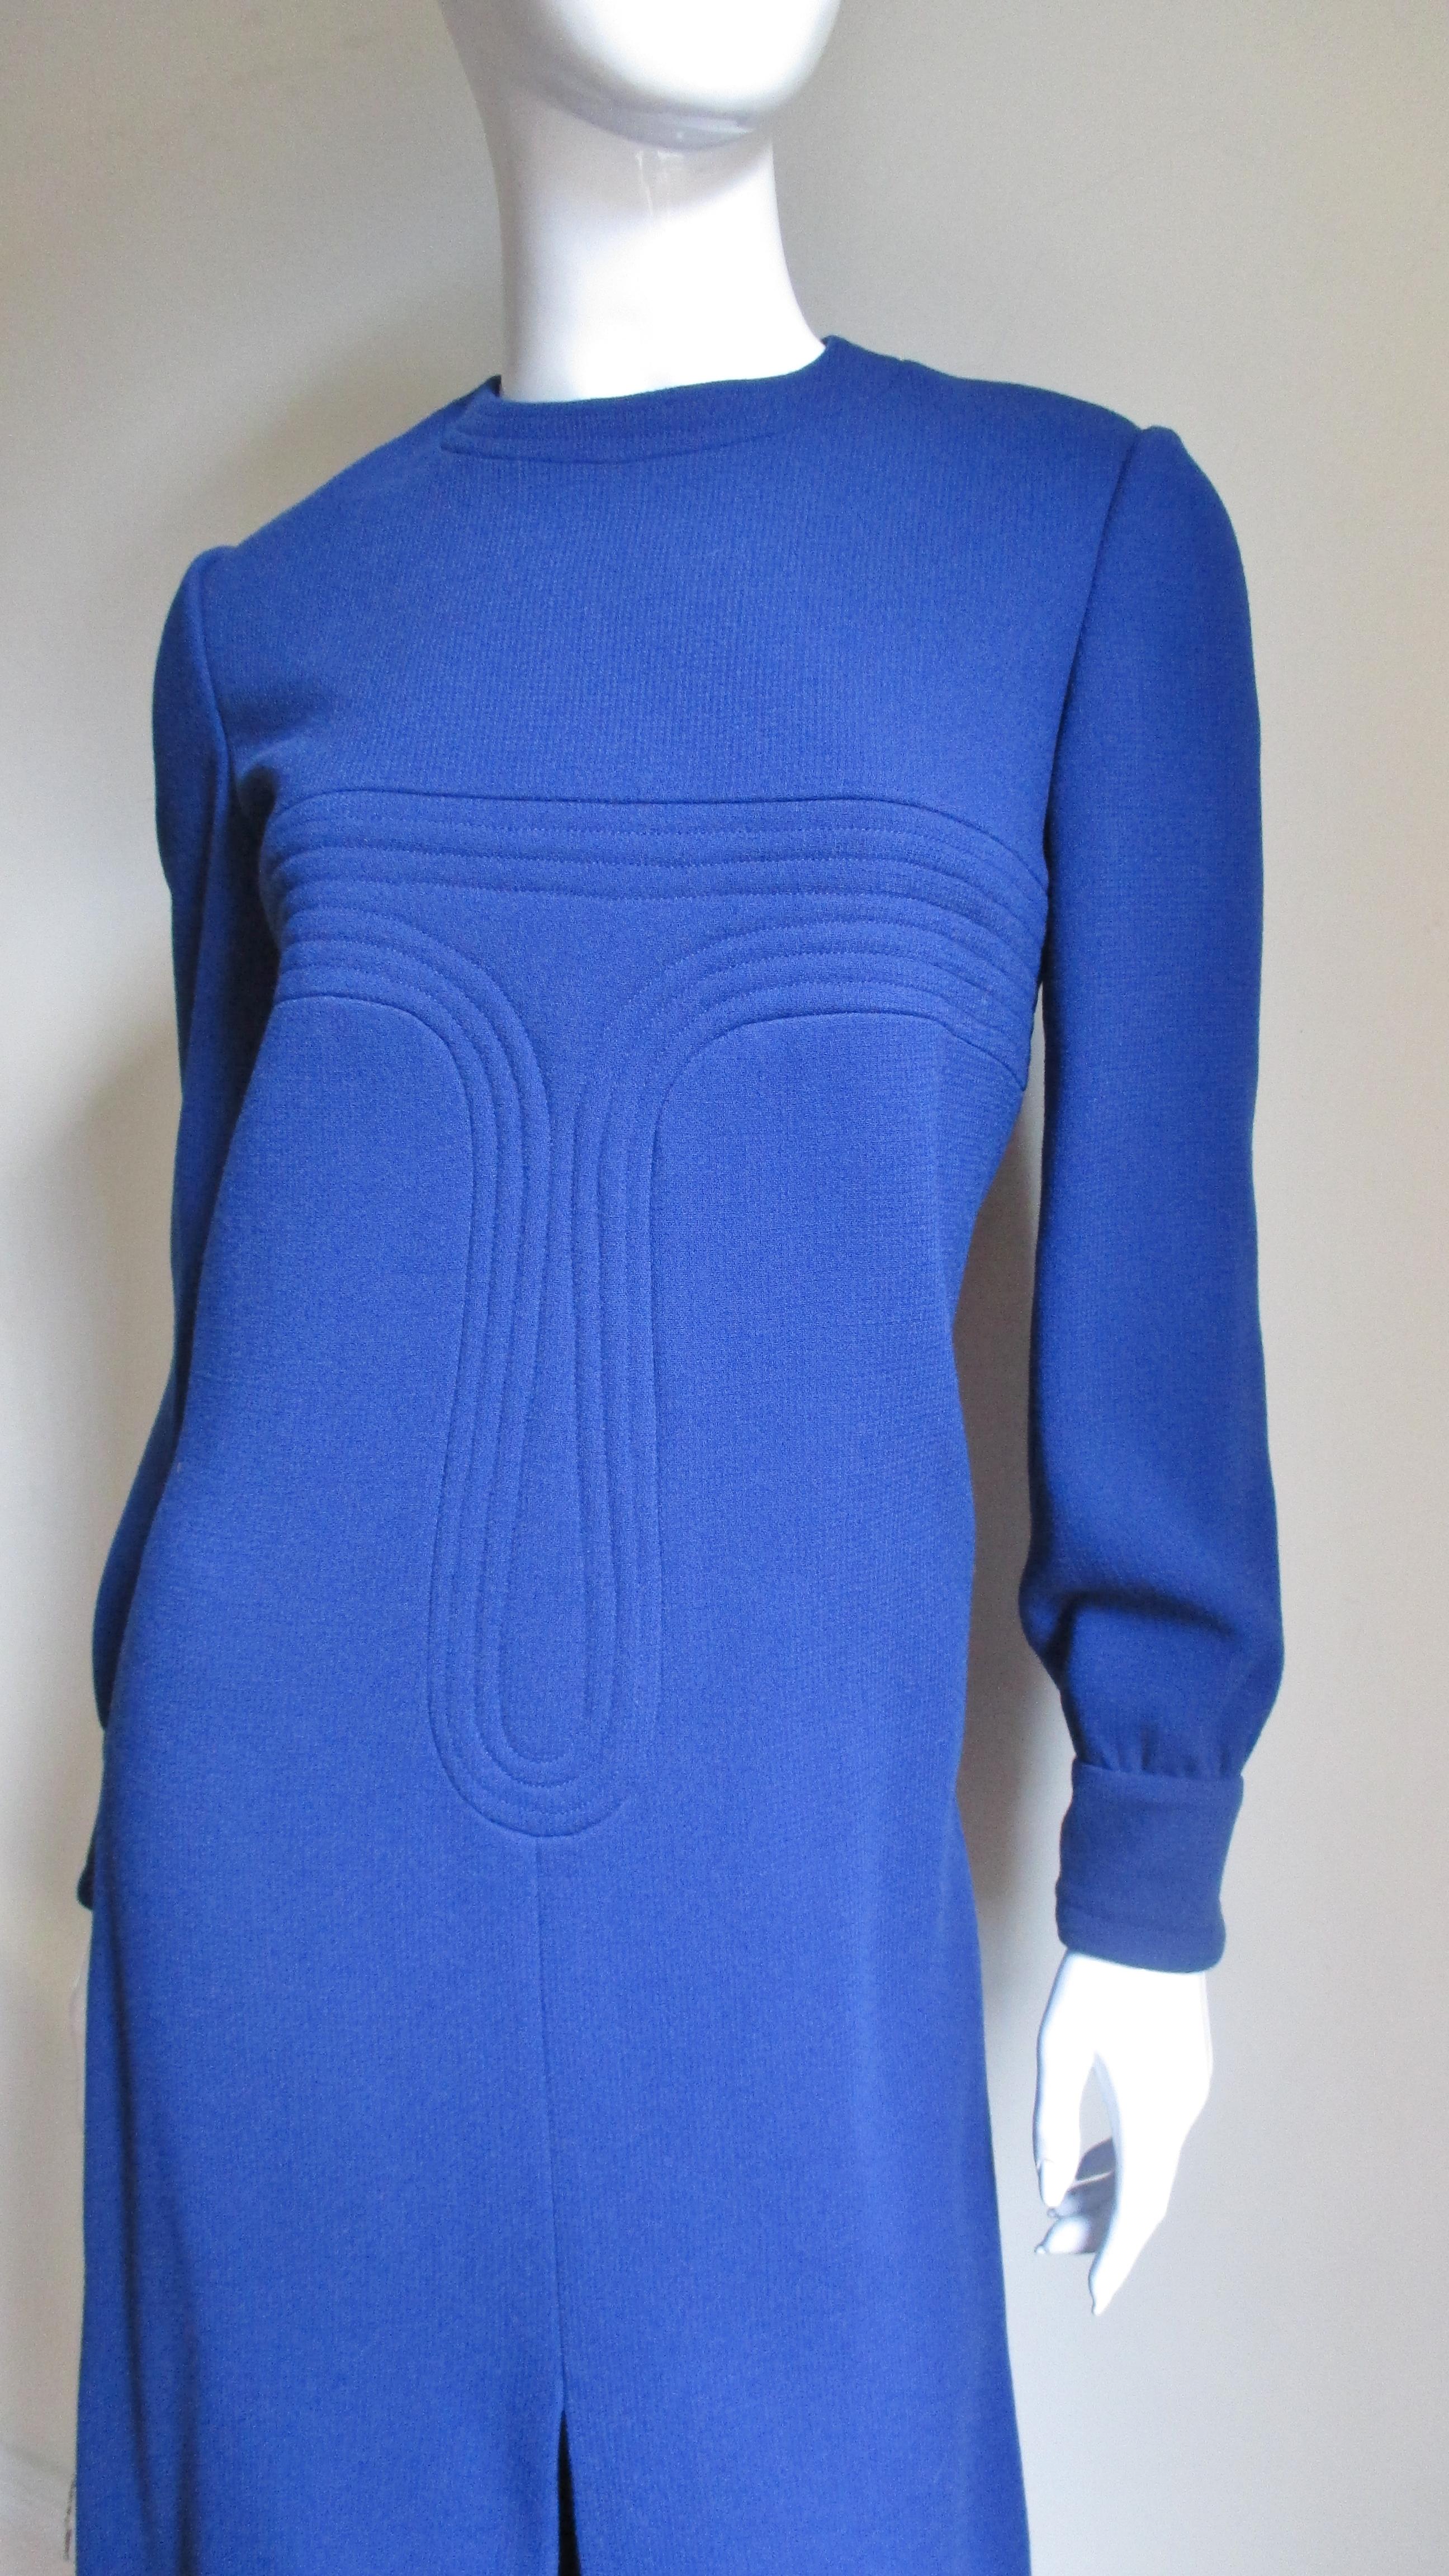 Blue 1960's Pierre Cardin Dress with Trapunto Embroidery